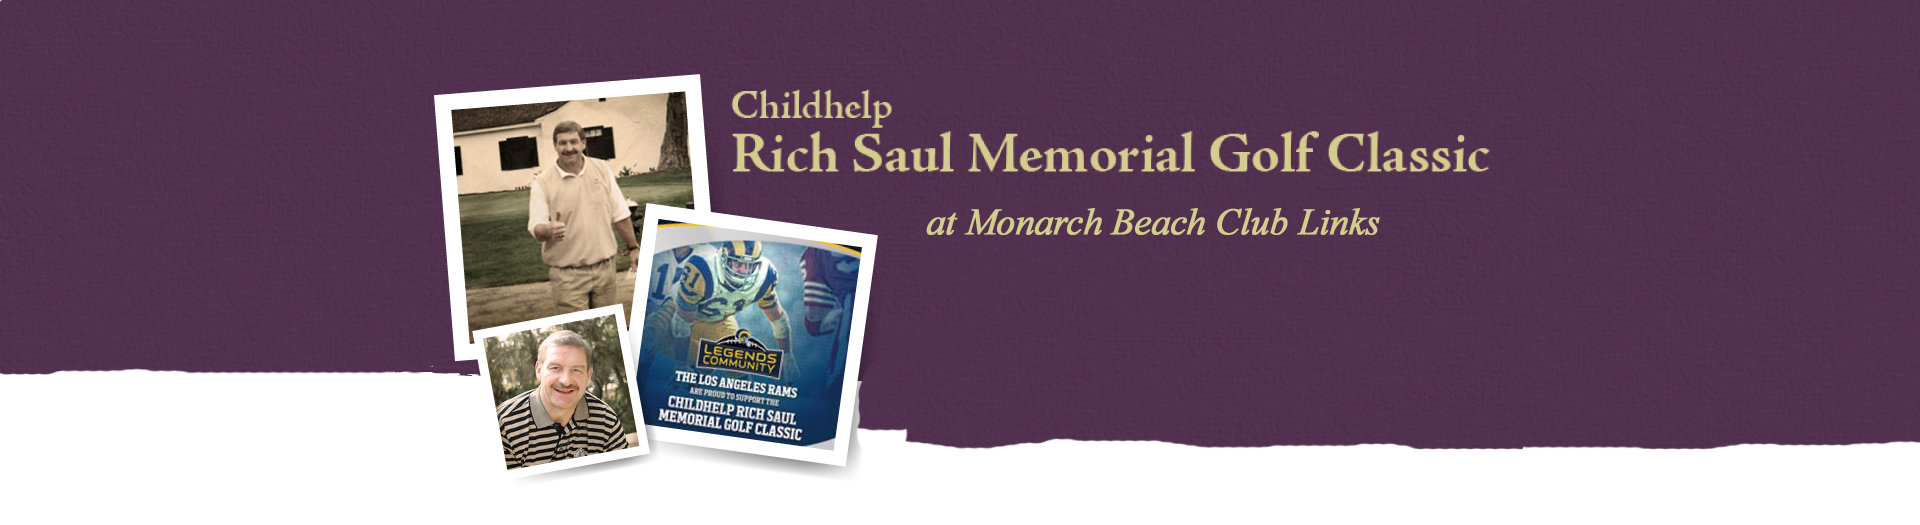 Childhelp Rich Saul Memorial Golf Classic delivers 100521